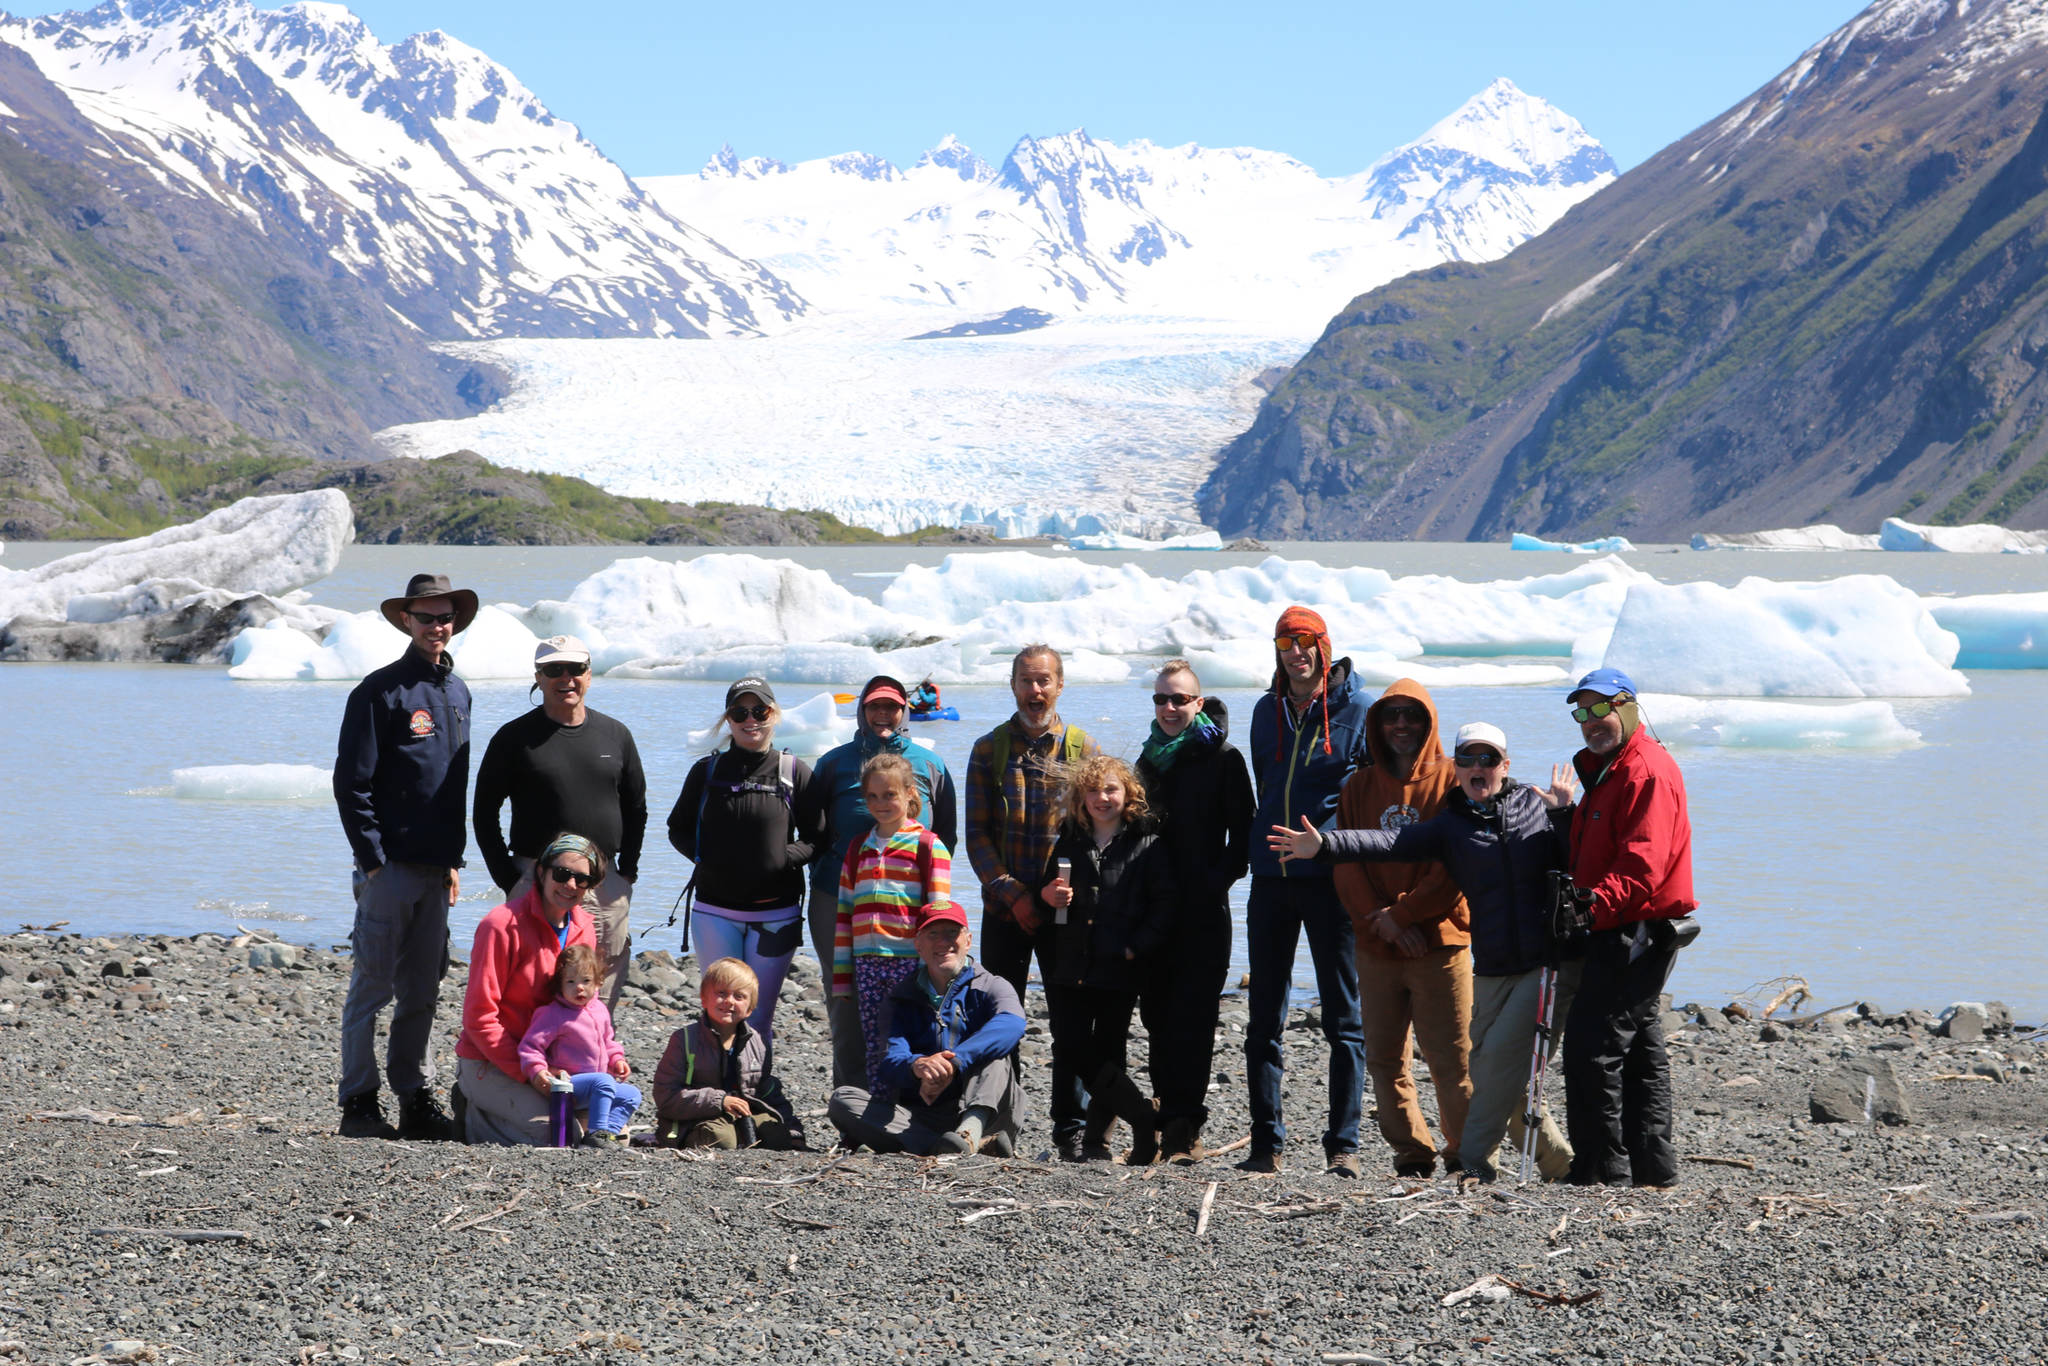 Photo by Clark Fair Trails Day participants enjoy a guided day hike to Grewingk Glacier on Saturday, June 2 across Kachemak Bay from Homer.